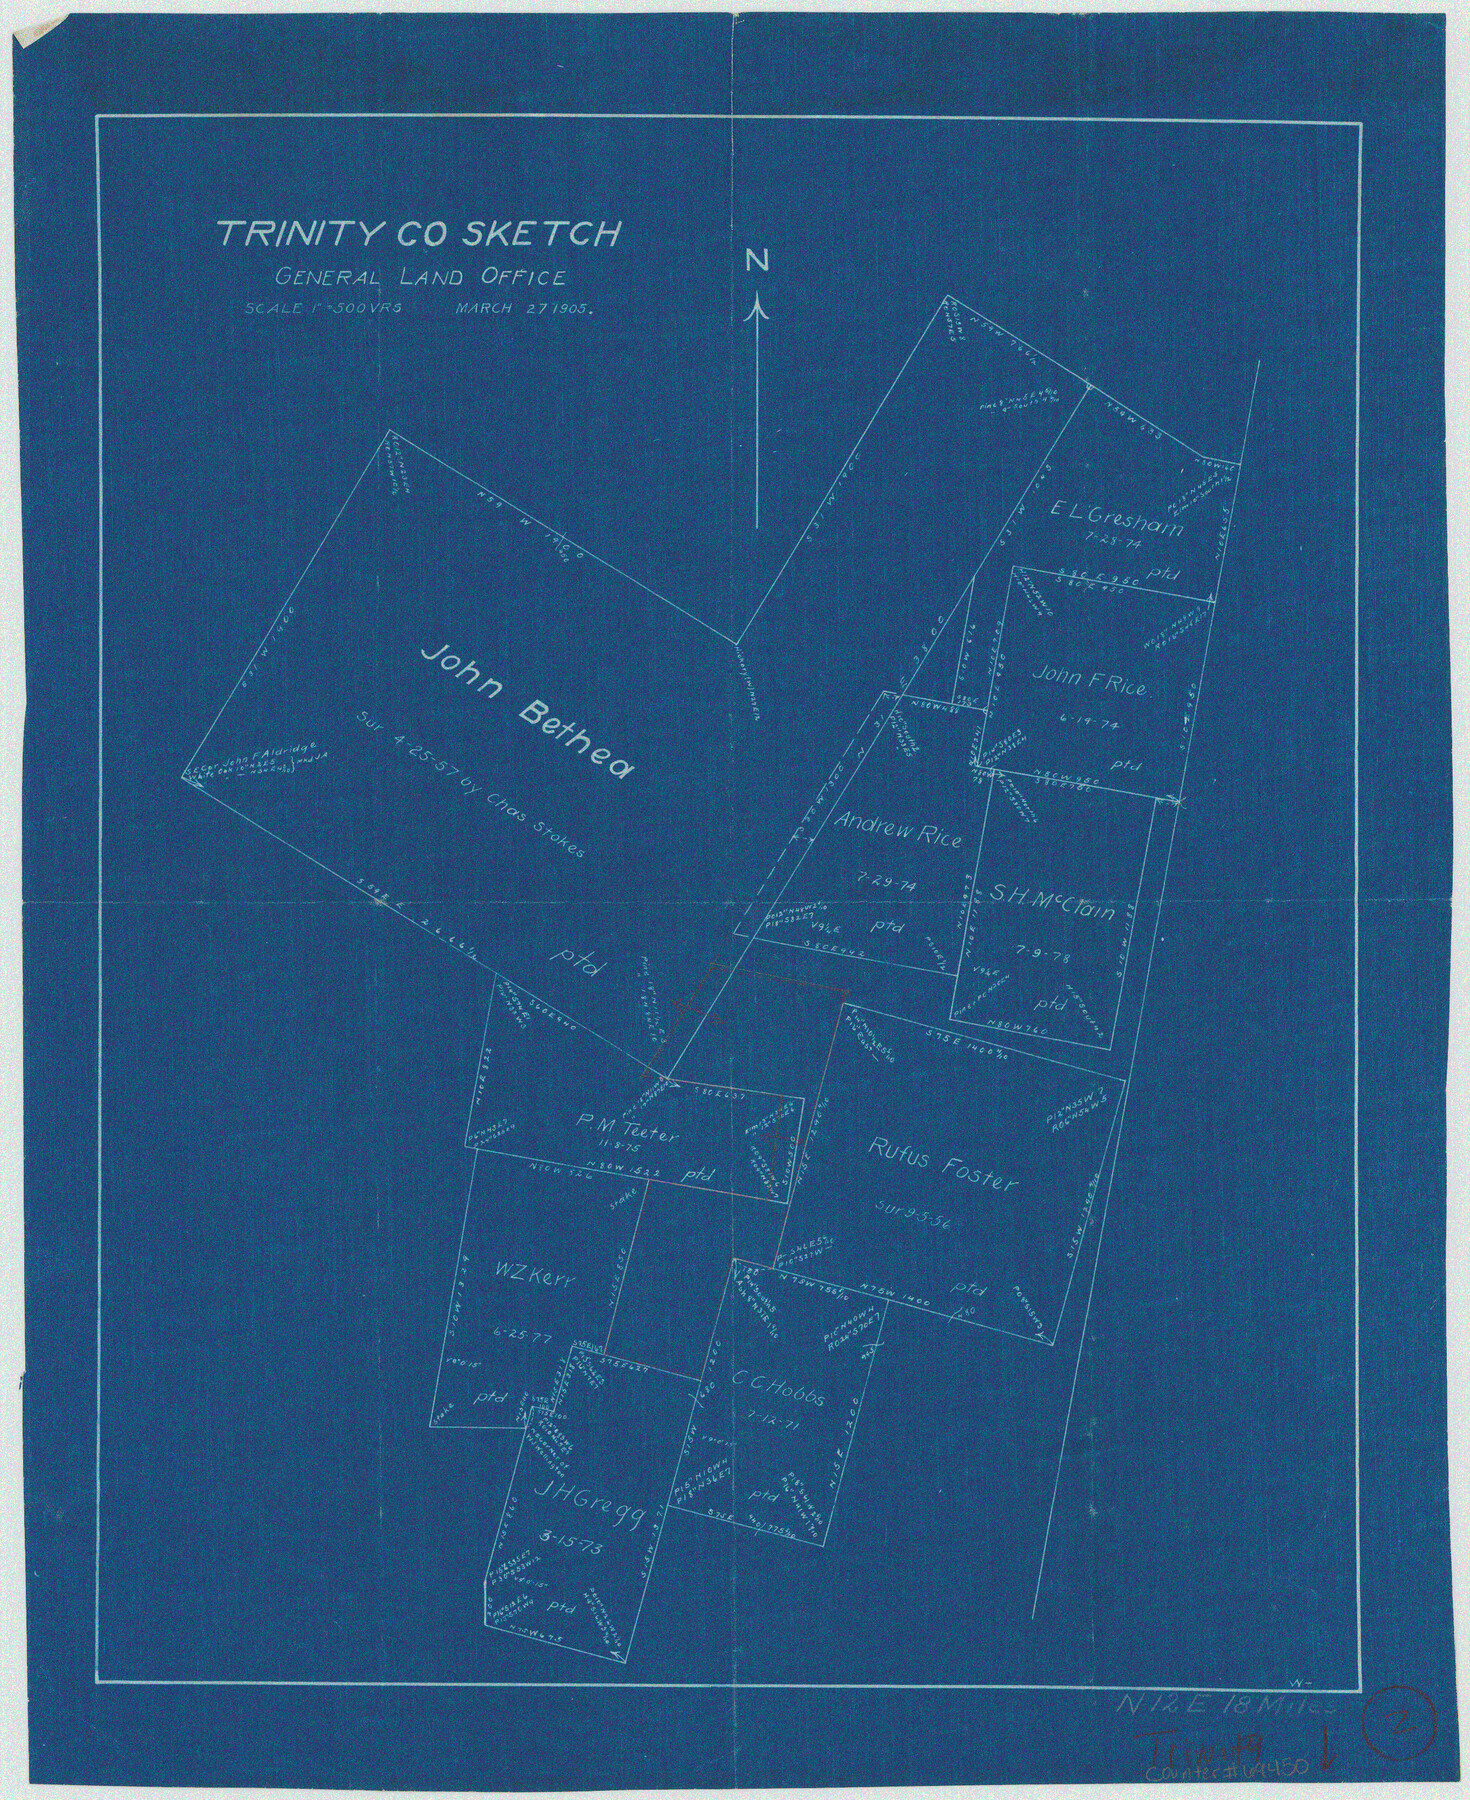 69450, Trinity County Working Sketch 2, General Map Collection